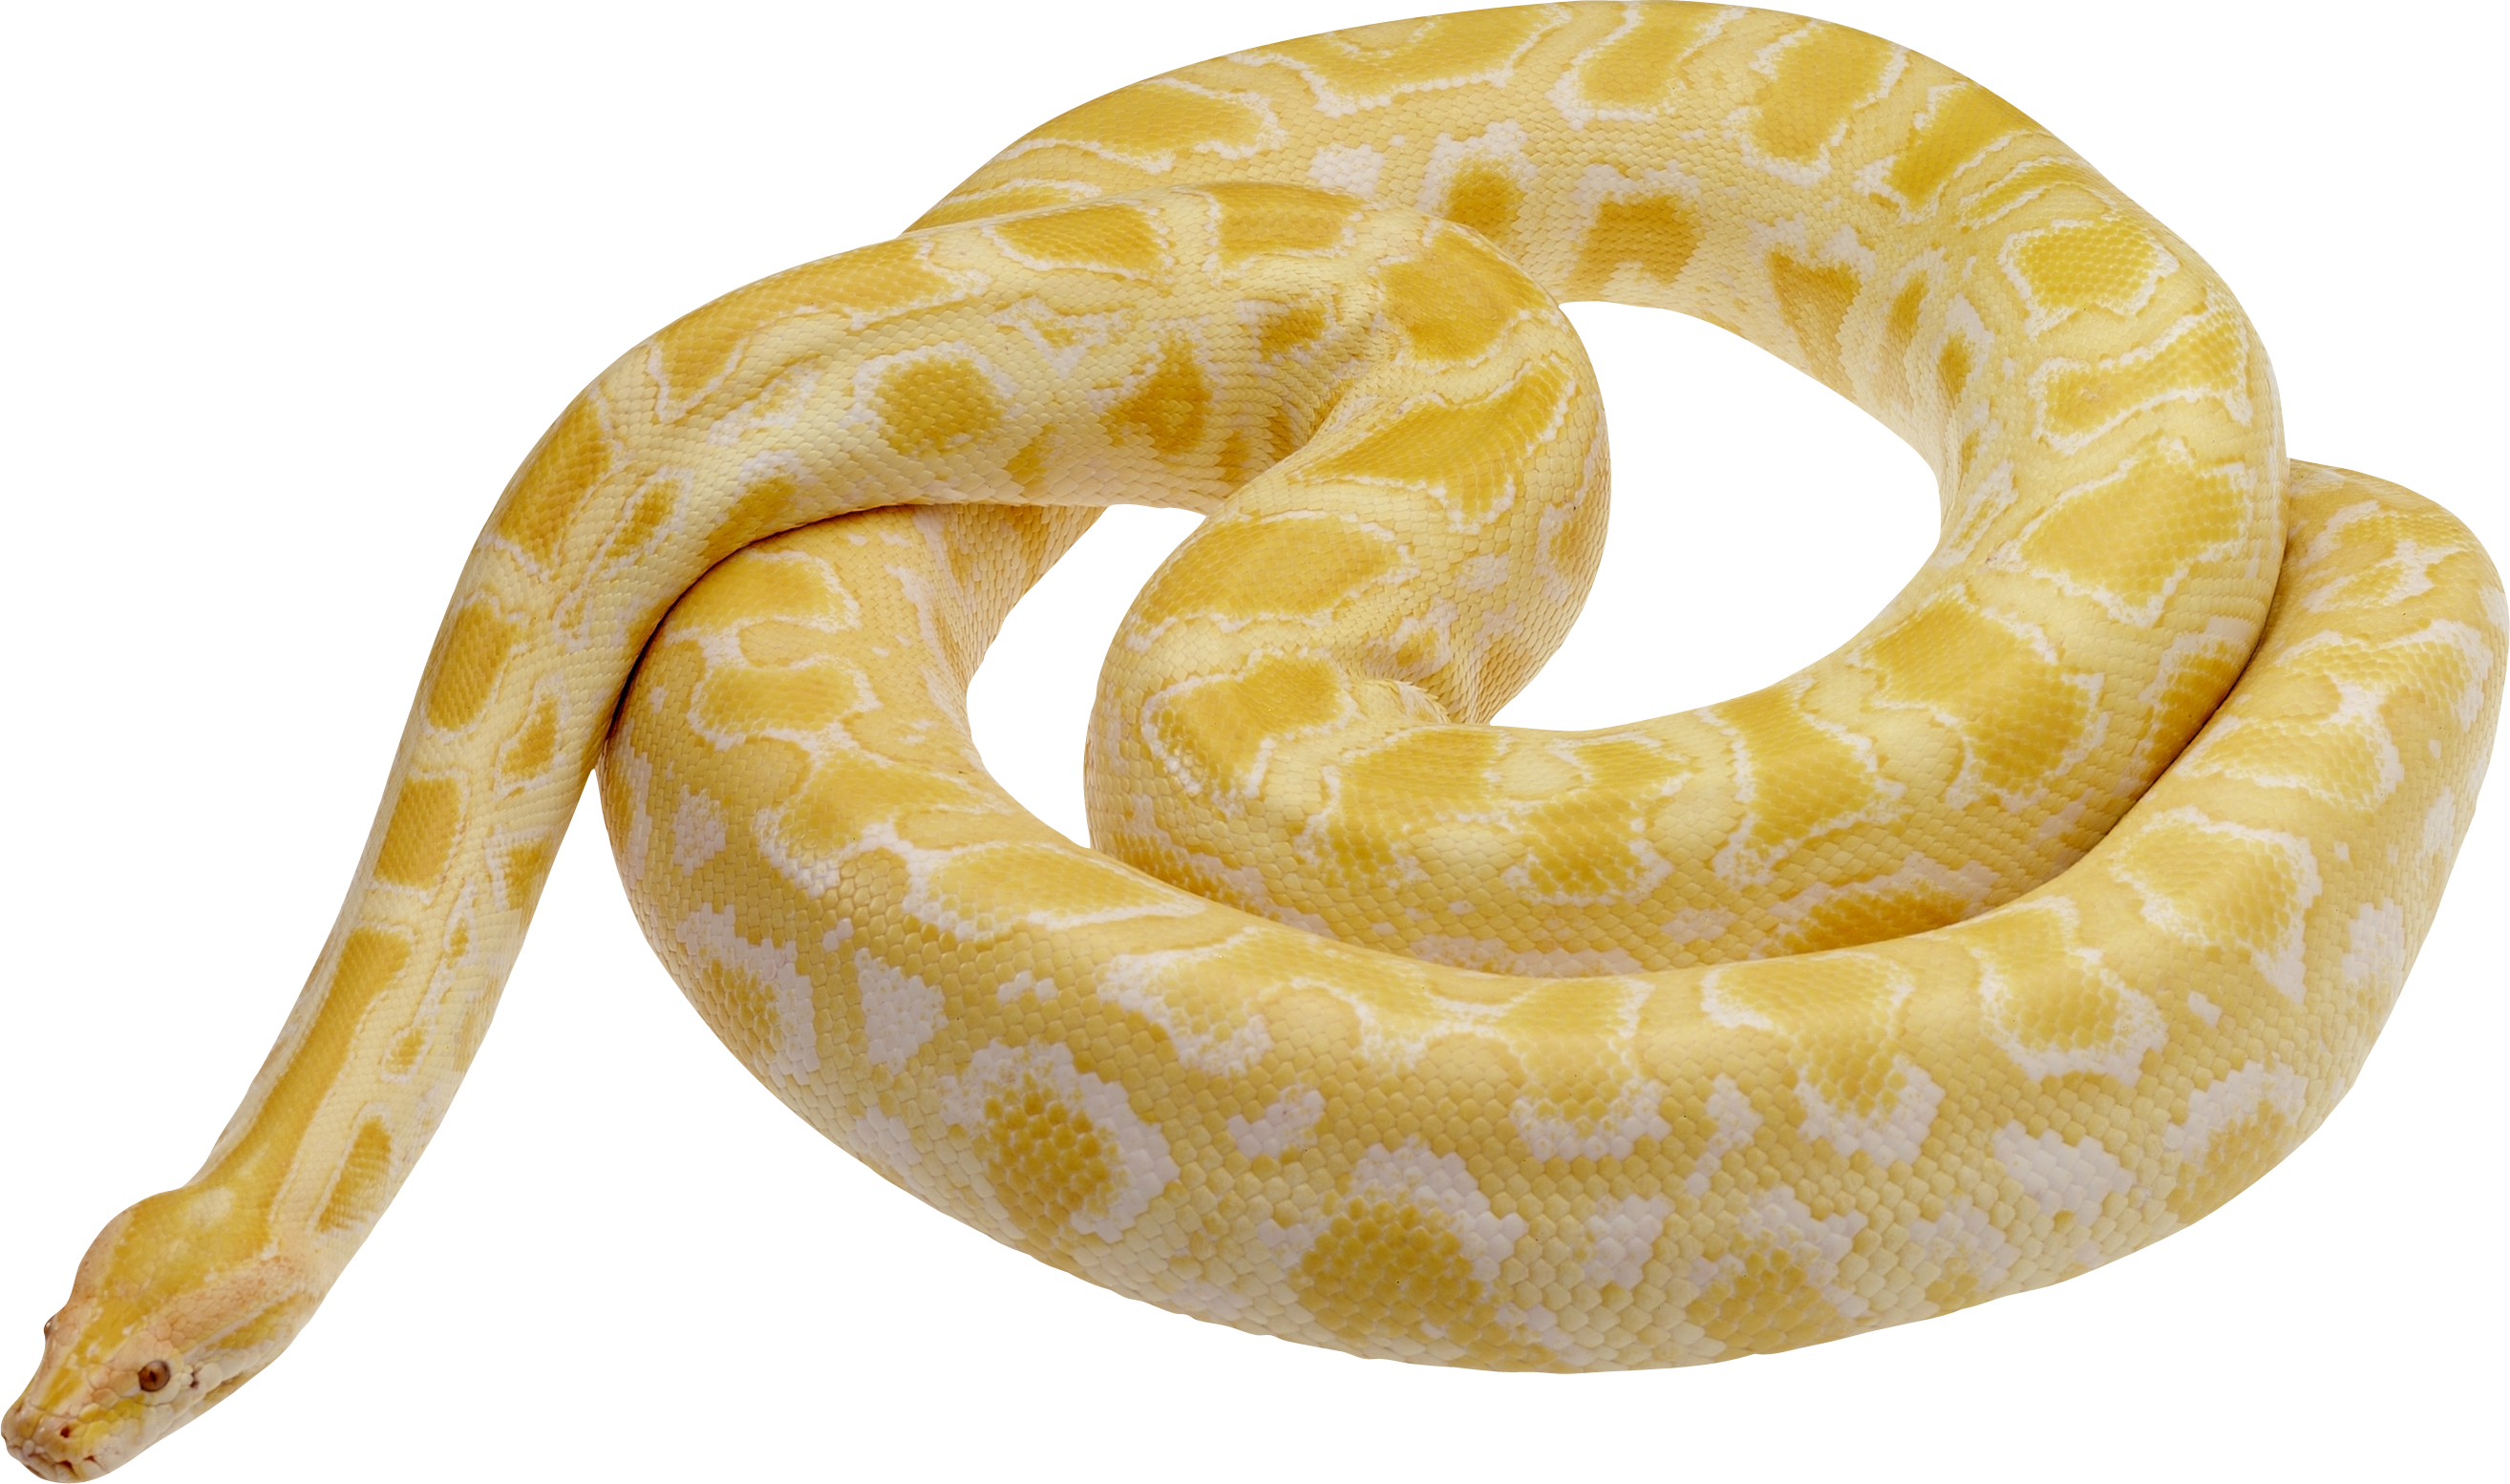 Snake Png Image Picture Download Free - Snake, Transparent background PNG HD thumbnail